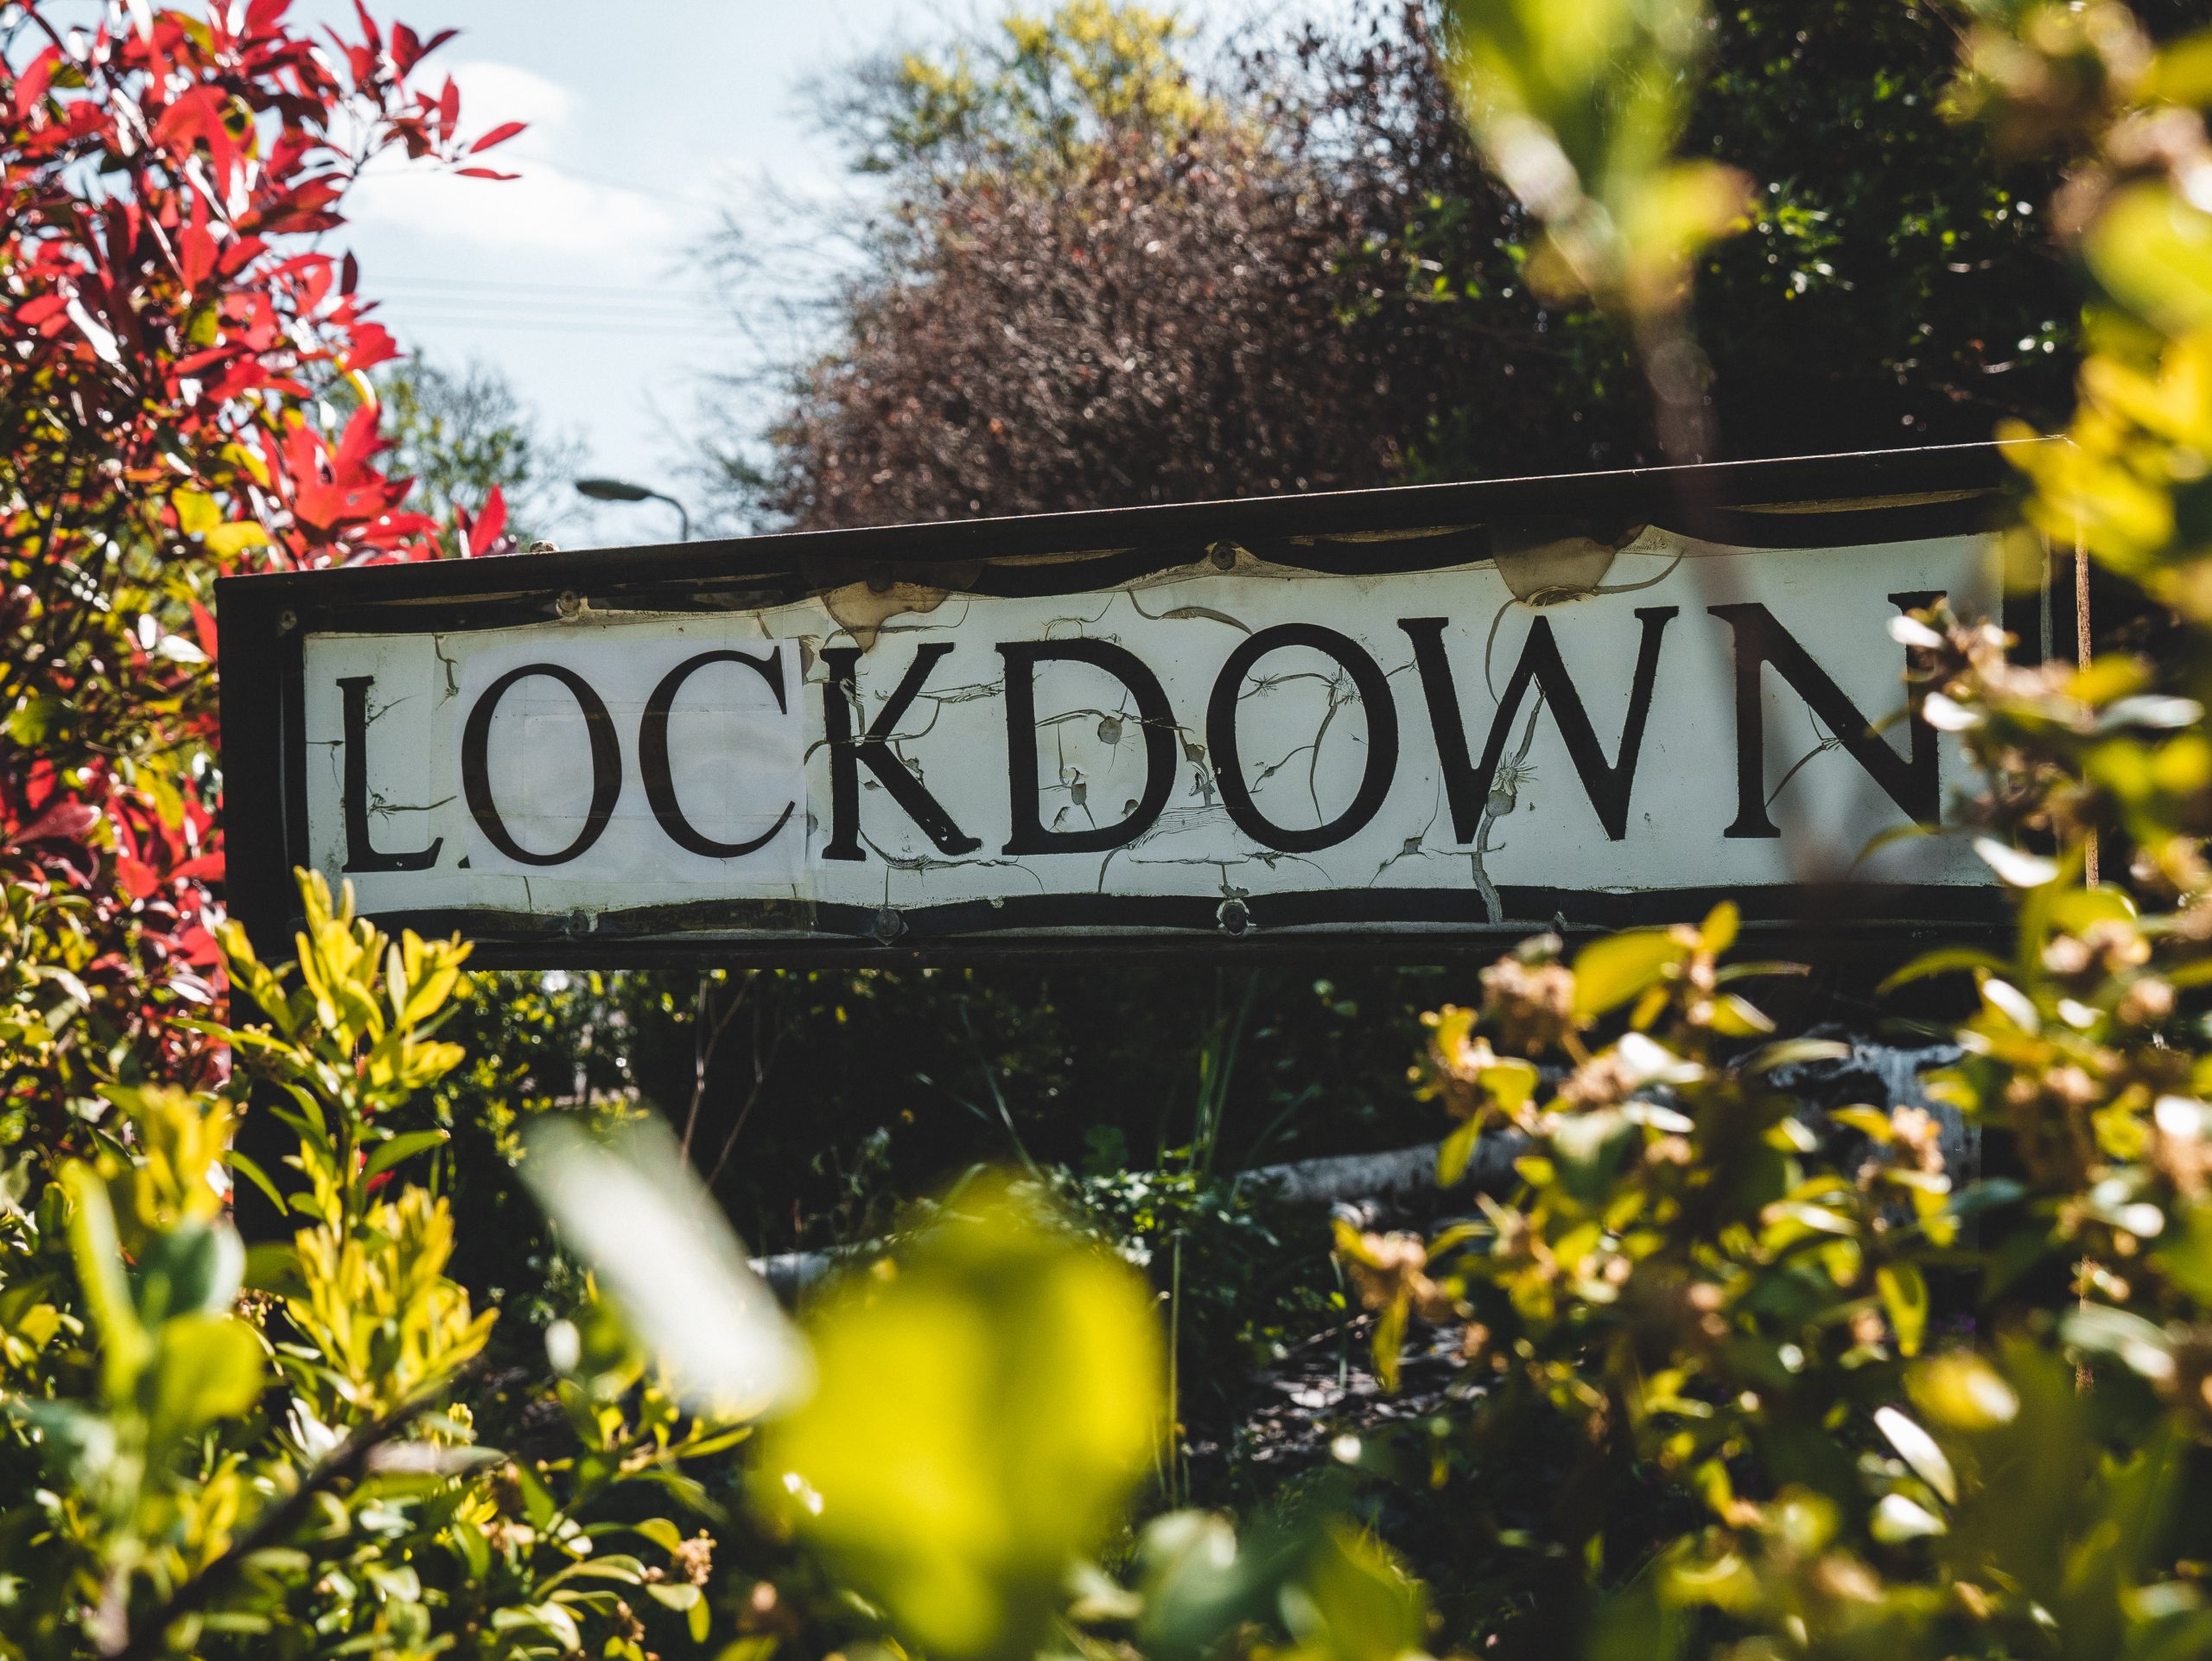 A British street sign sits nestled amongst some shrubbery. The sign reads "lockdown"